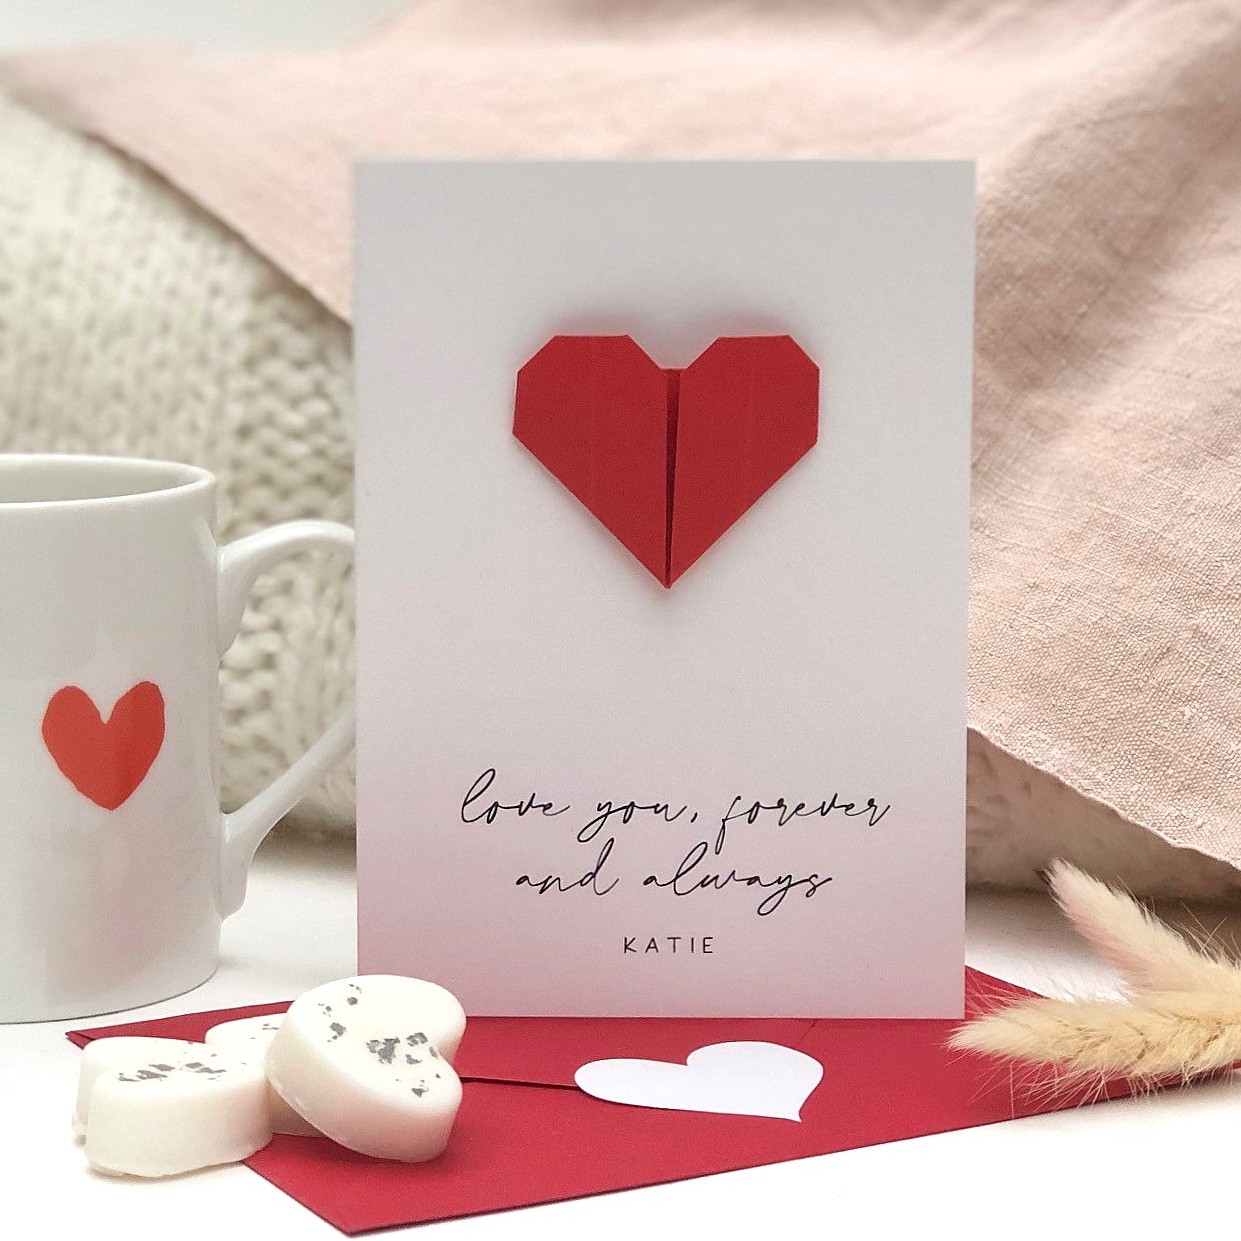 https://www.hummingbirdcards.co.uk/wp-content/uploads/2021/01/Origami-Heart-Personalised-Valentines-Card-9.jpg